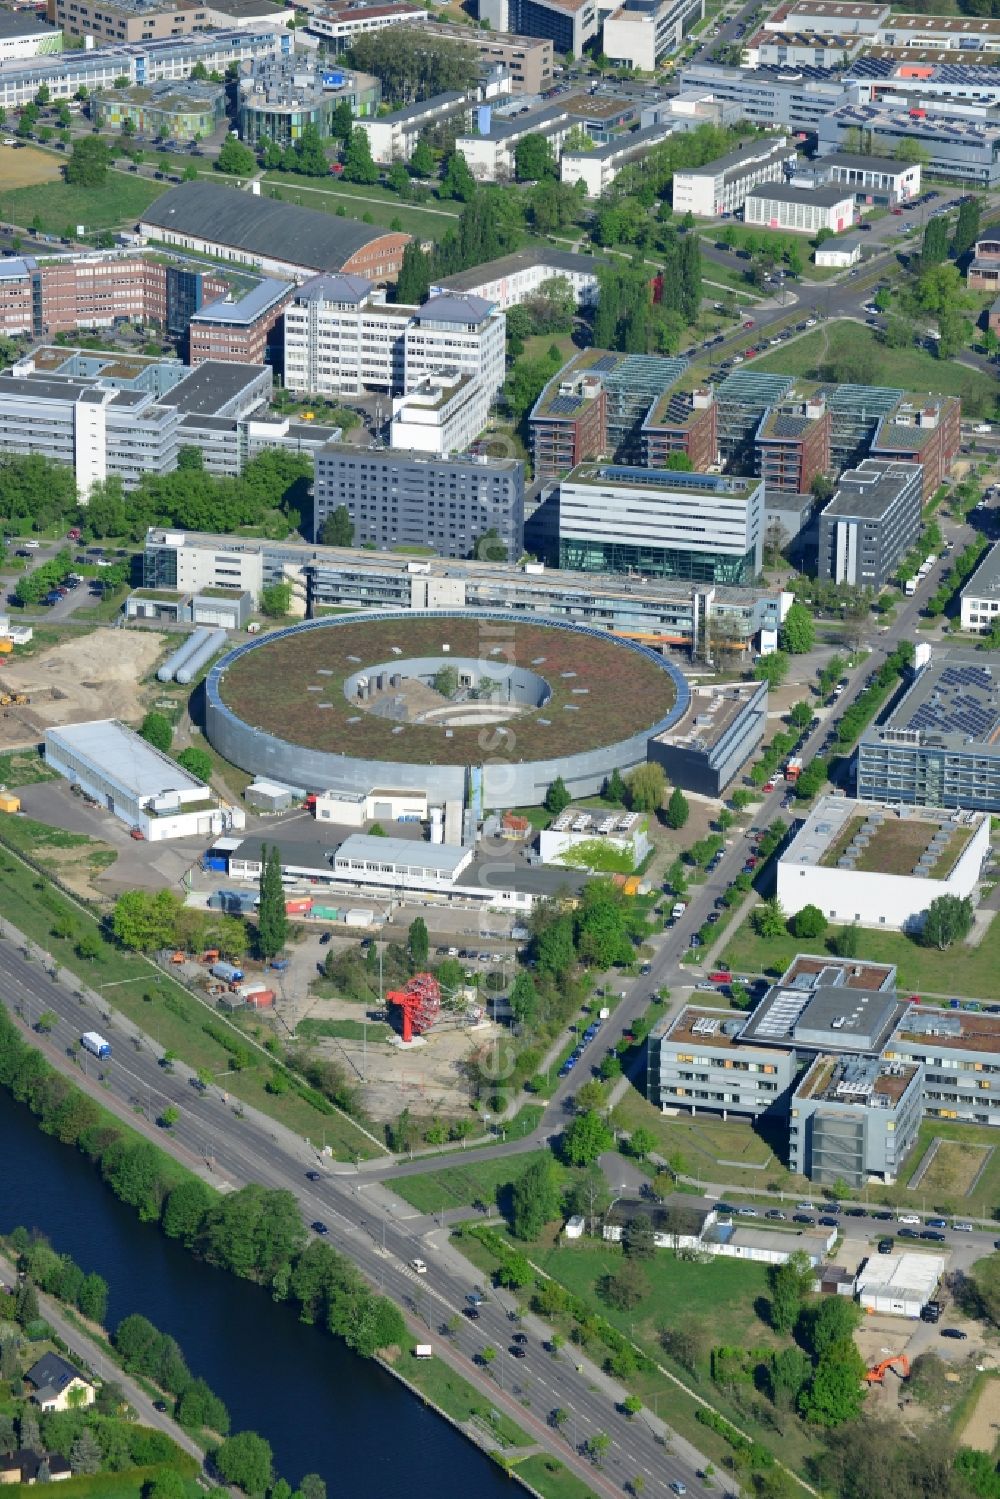 Berlin from above - Expansion - Construction site at the electron storage ring BESSY - the third generation synchrotron radiation source in Berlin - Adlershof